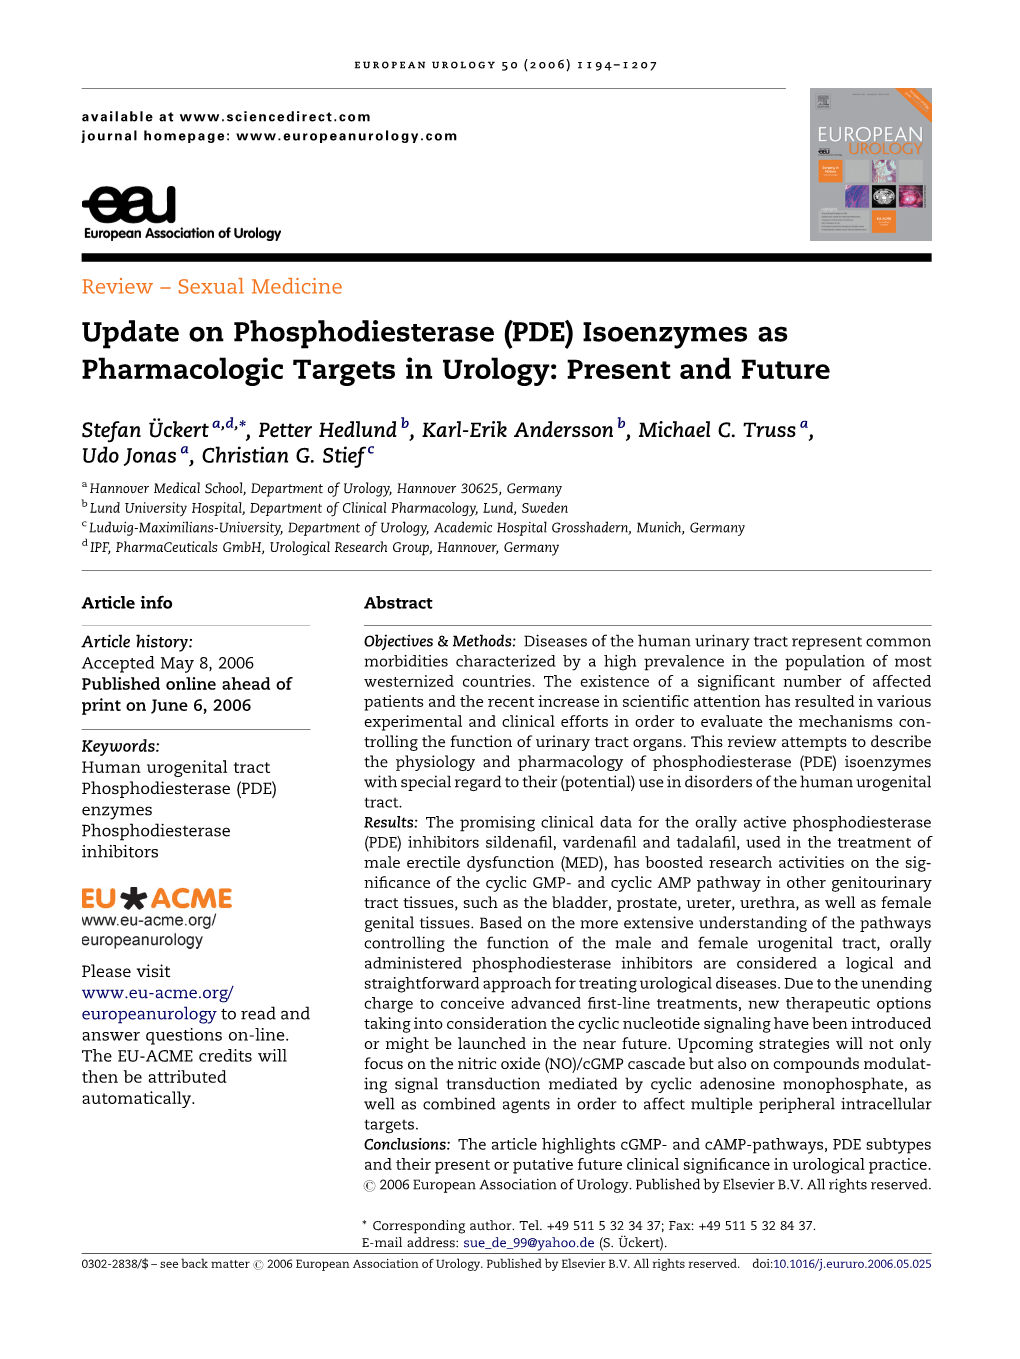 (PDE) Isoenzymes As Pharmacologic Targets in Urology: Present and Future